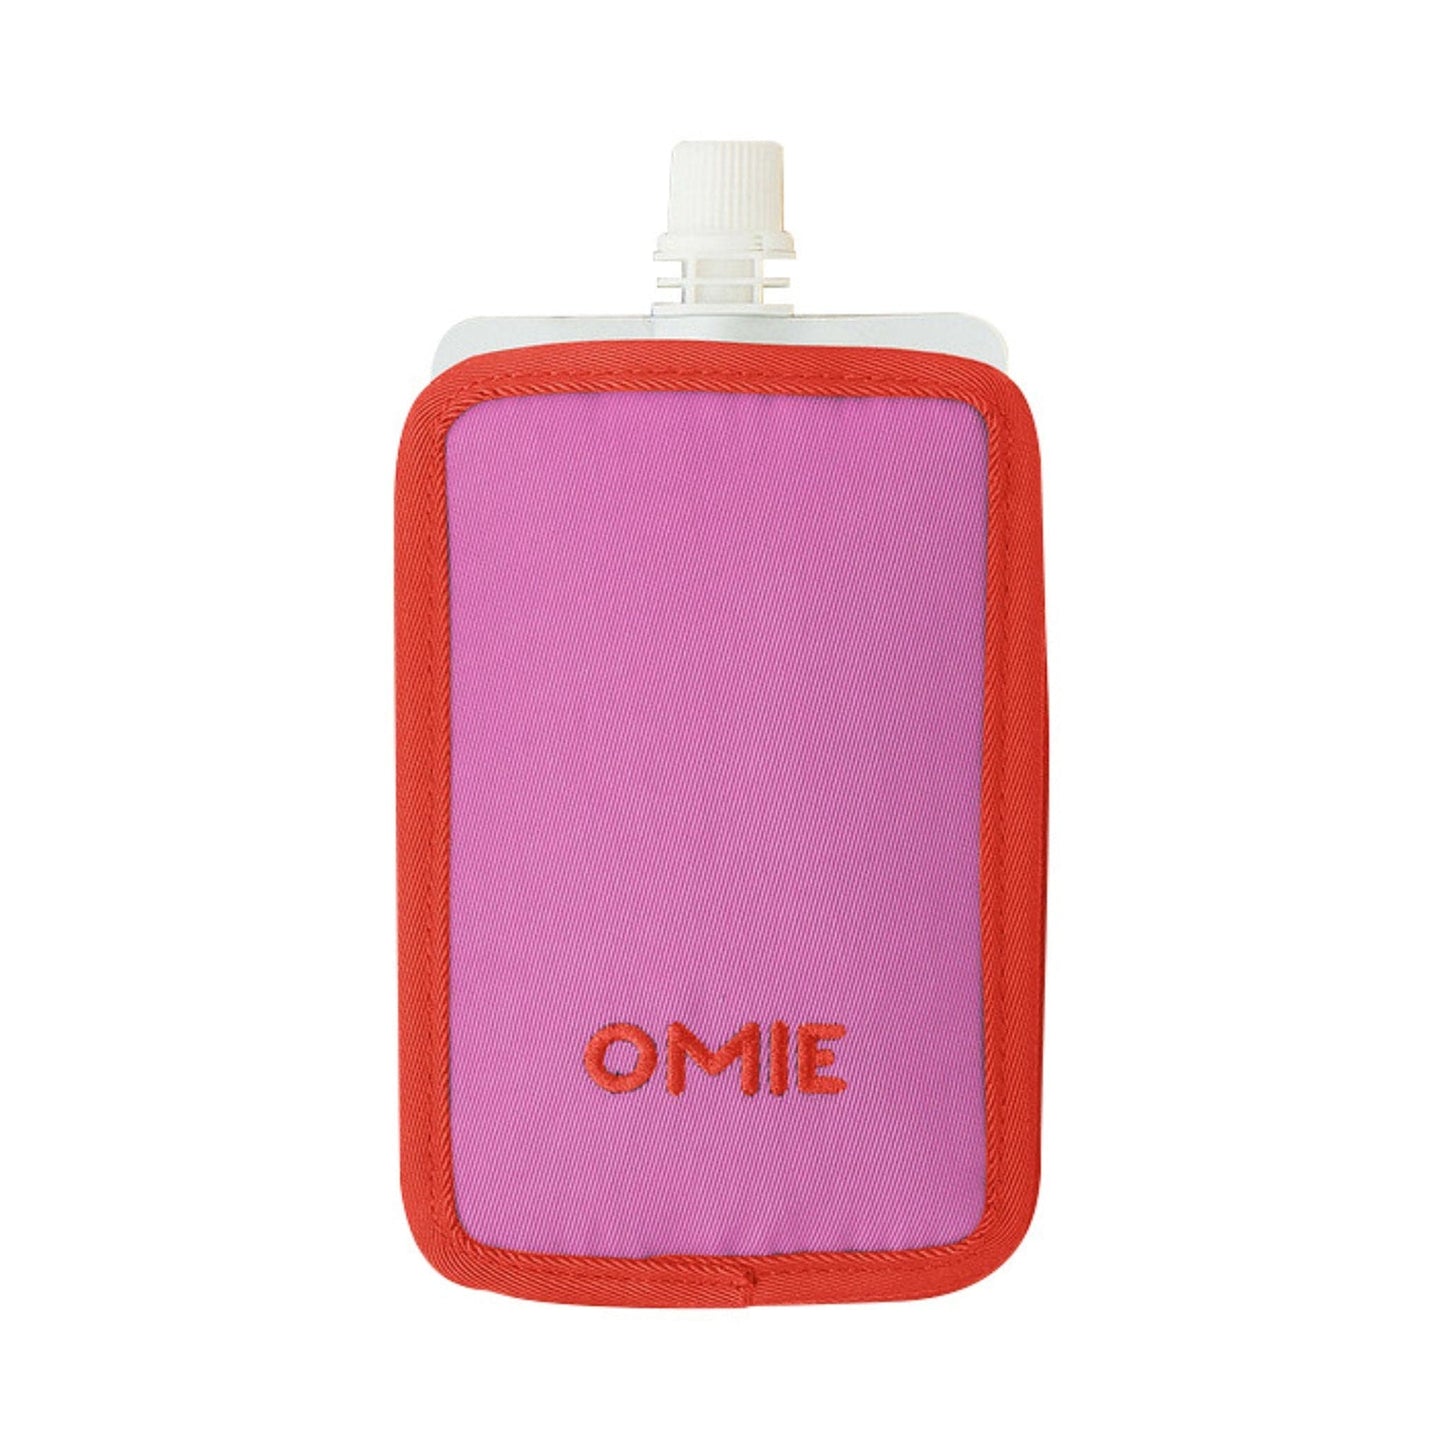 OmieChill Freezable Food Pouch